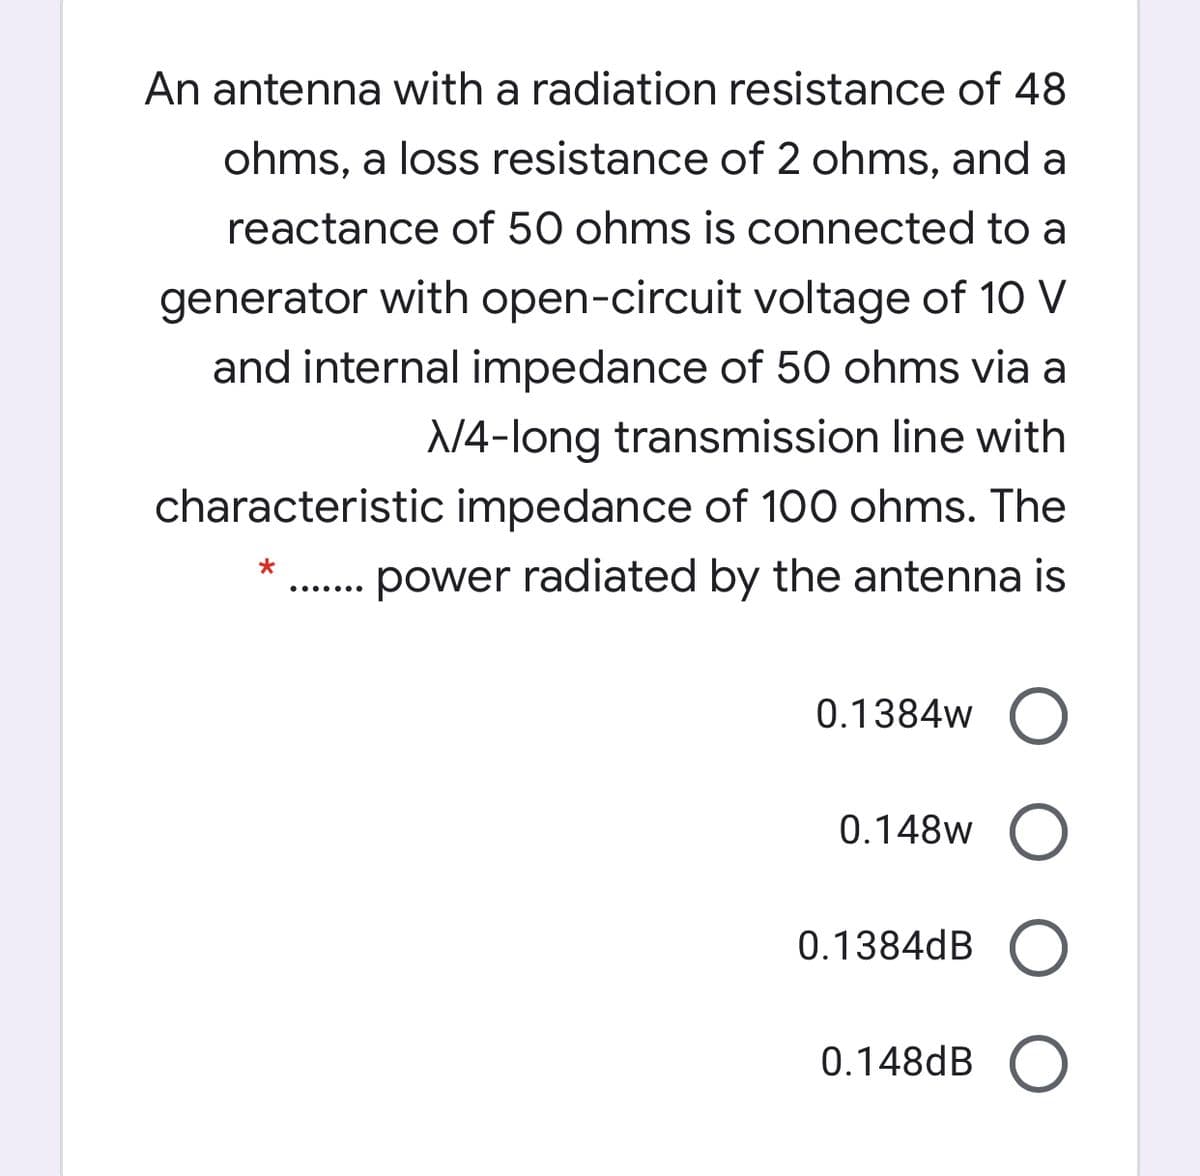 An antenna with a radiation resistance of 48
ohms, a loss resistance of 2 ohms, and a
reactance of 50 ohms is connected to a
generator with open-circuit voltage of 10 V
and internal impedance of 50 ohms via a
N4-long transmission line with
characteristic impedance of 100 ohms. The
. power radiated by the antenna is
.... ...
0.1384w
0.148w
0.1384dB
0.148dB O
